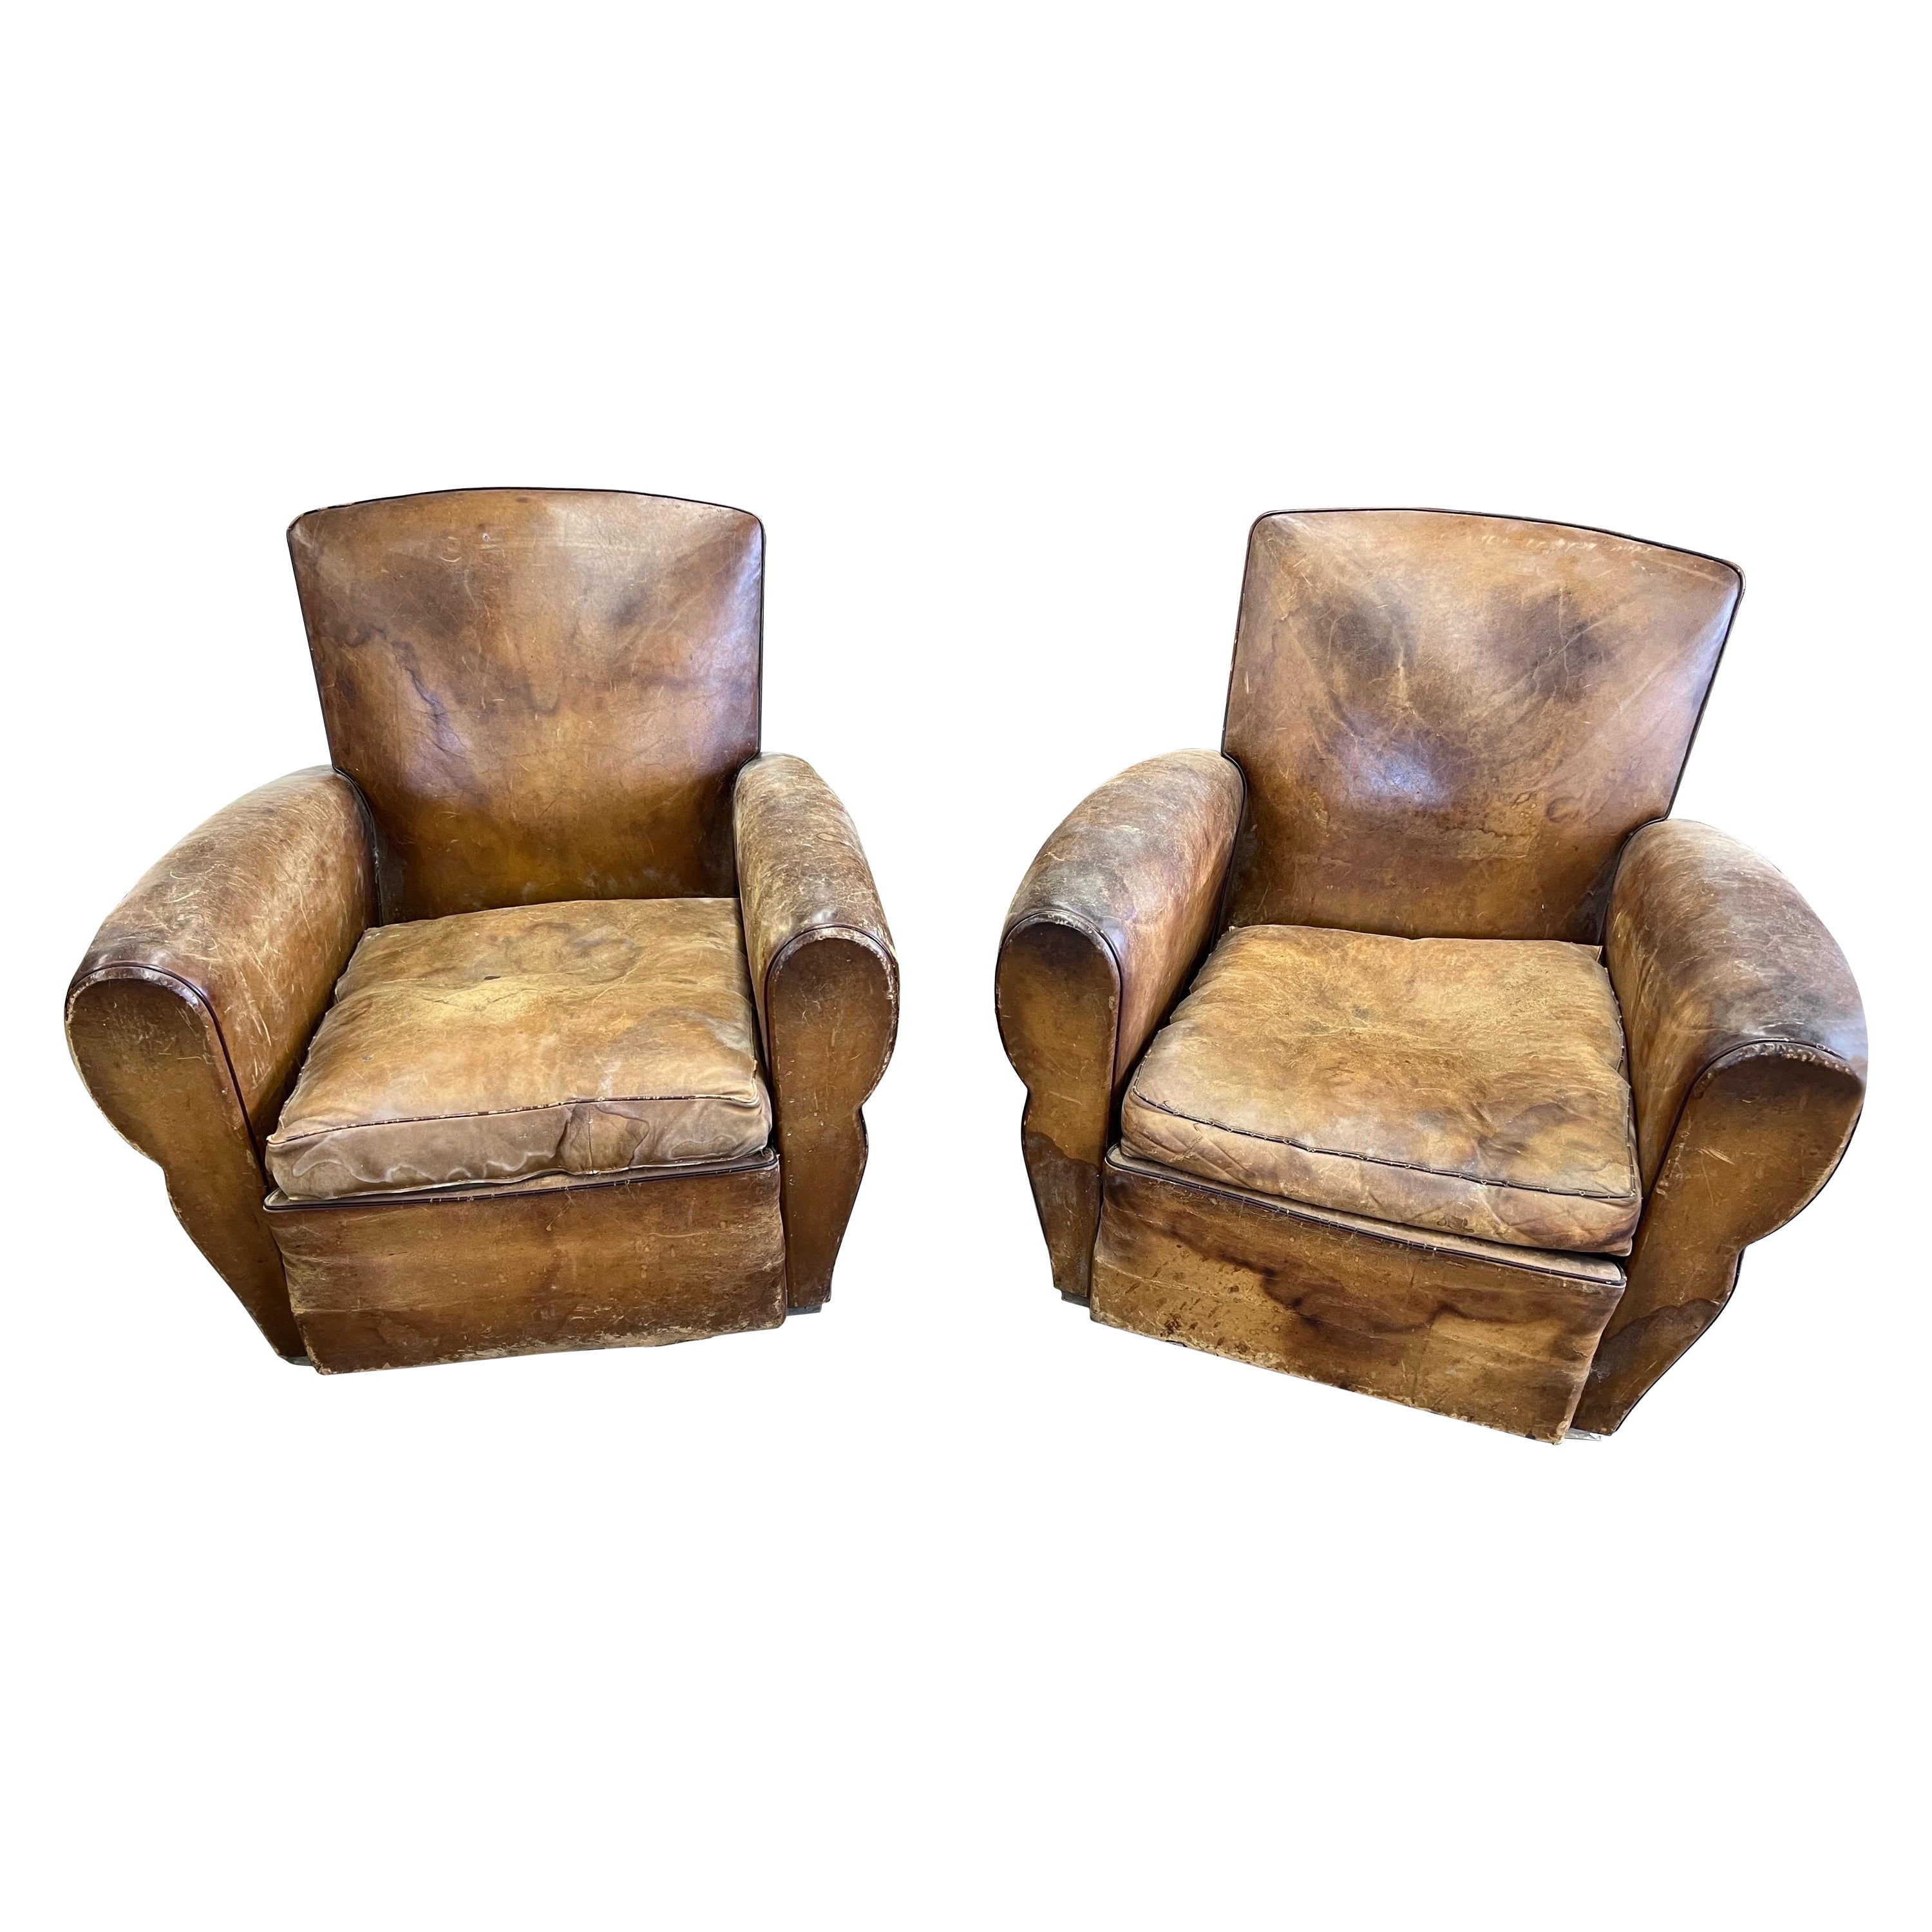 Pair of French Deco Period Leather Club Chairs with Great Patina